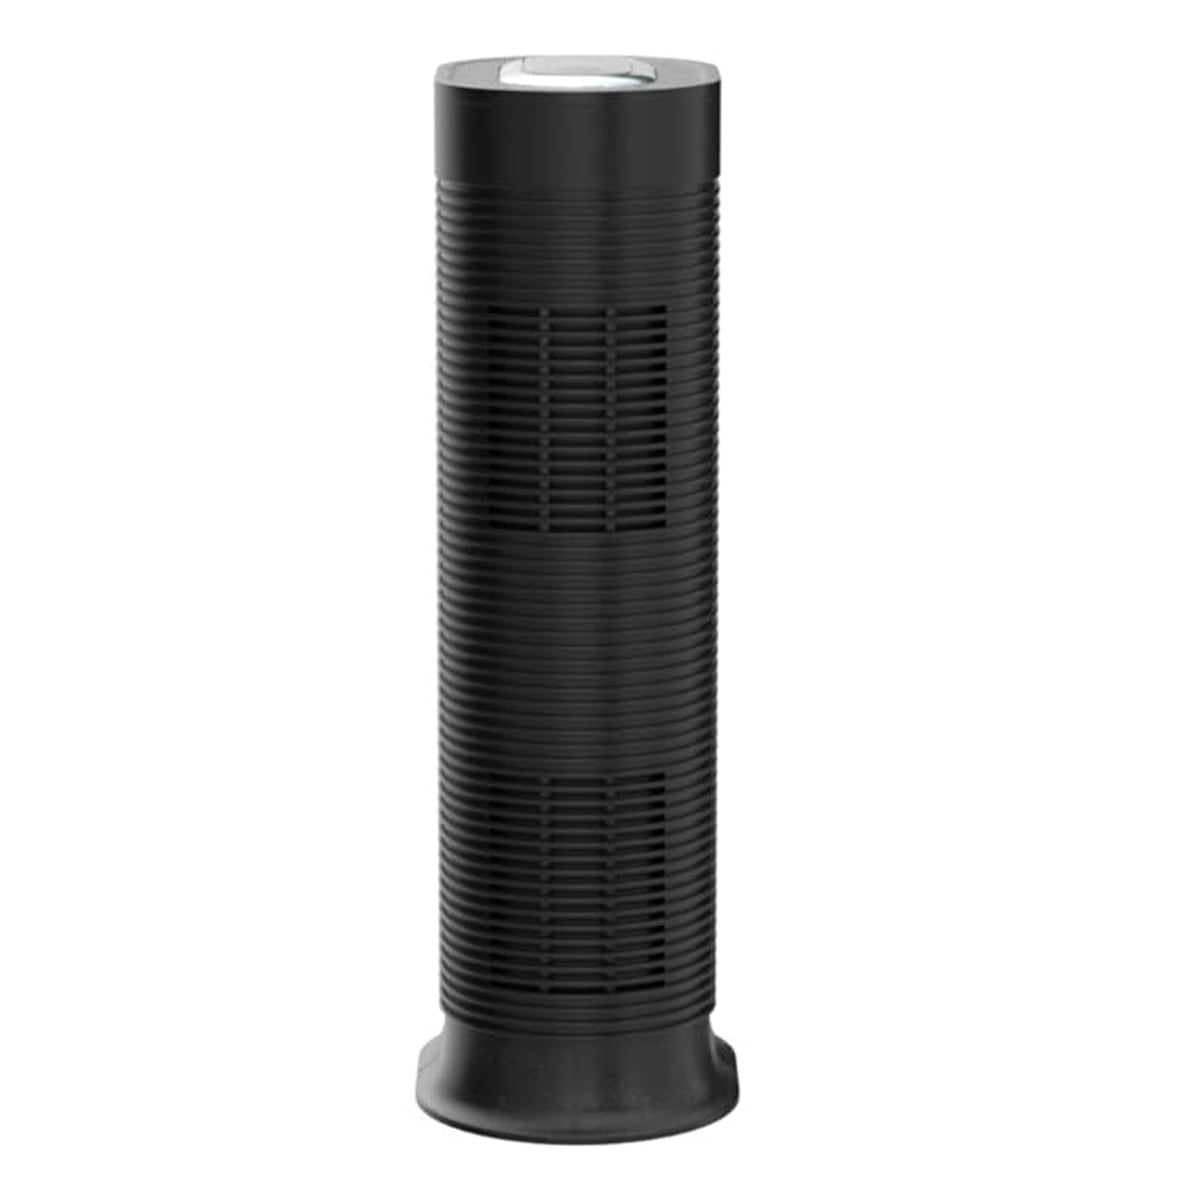 Honeywell True HEPA Tower Air Purifier w/ Allergen Remover (HPA160, 170 sq ft) $65 + Free Shipping